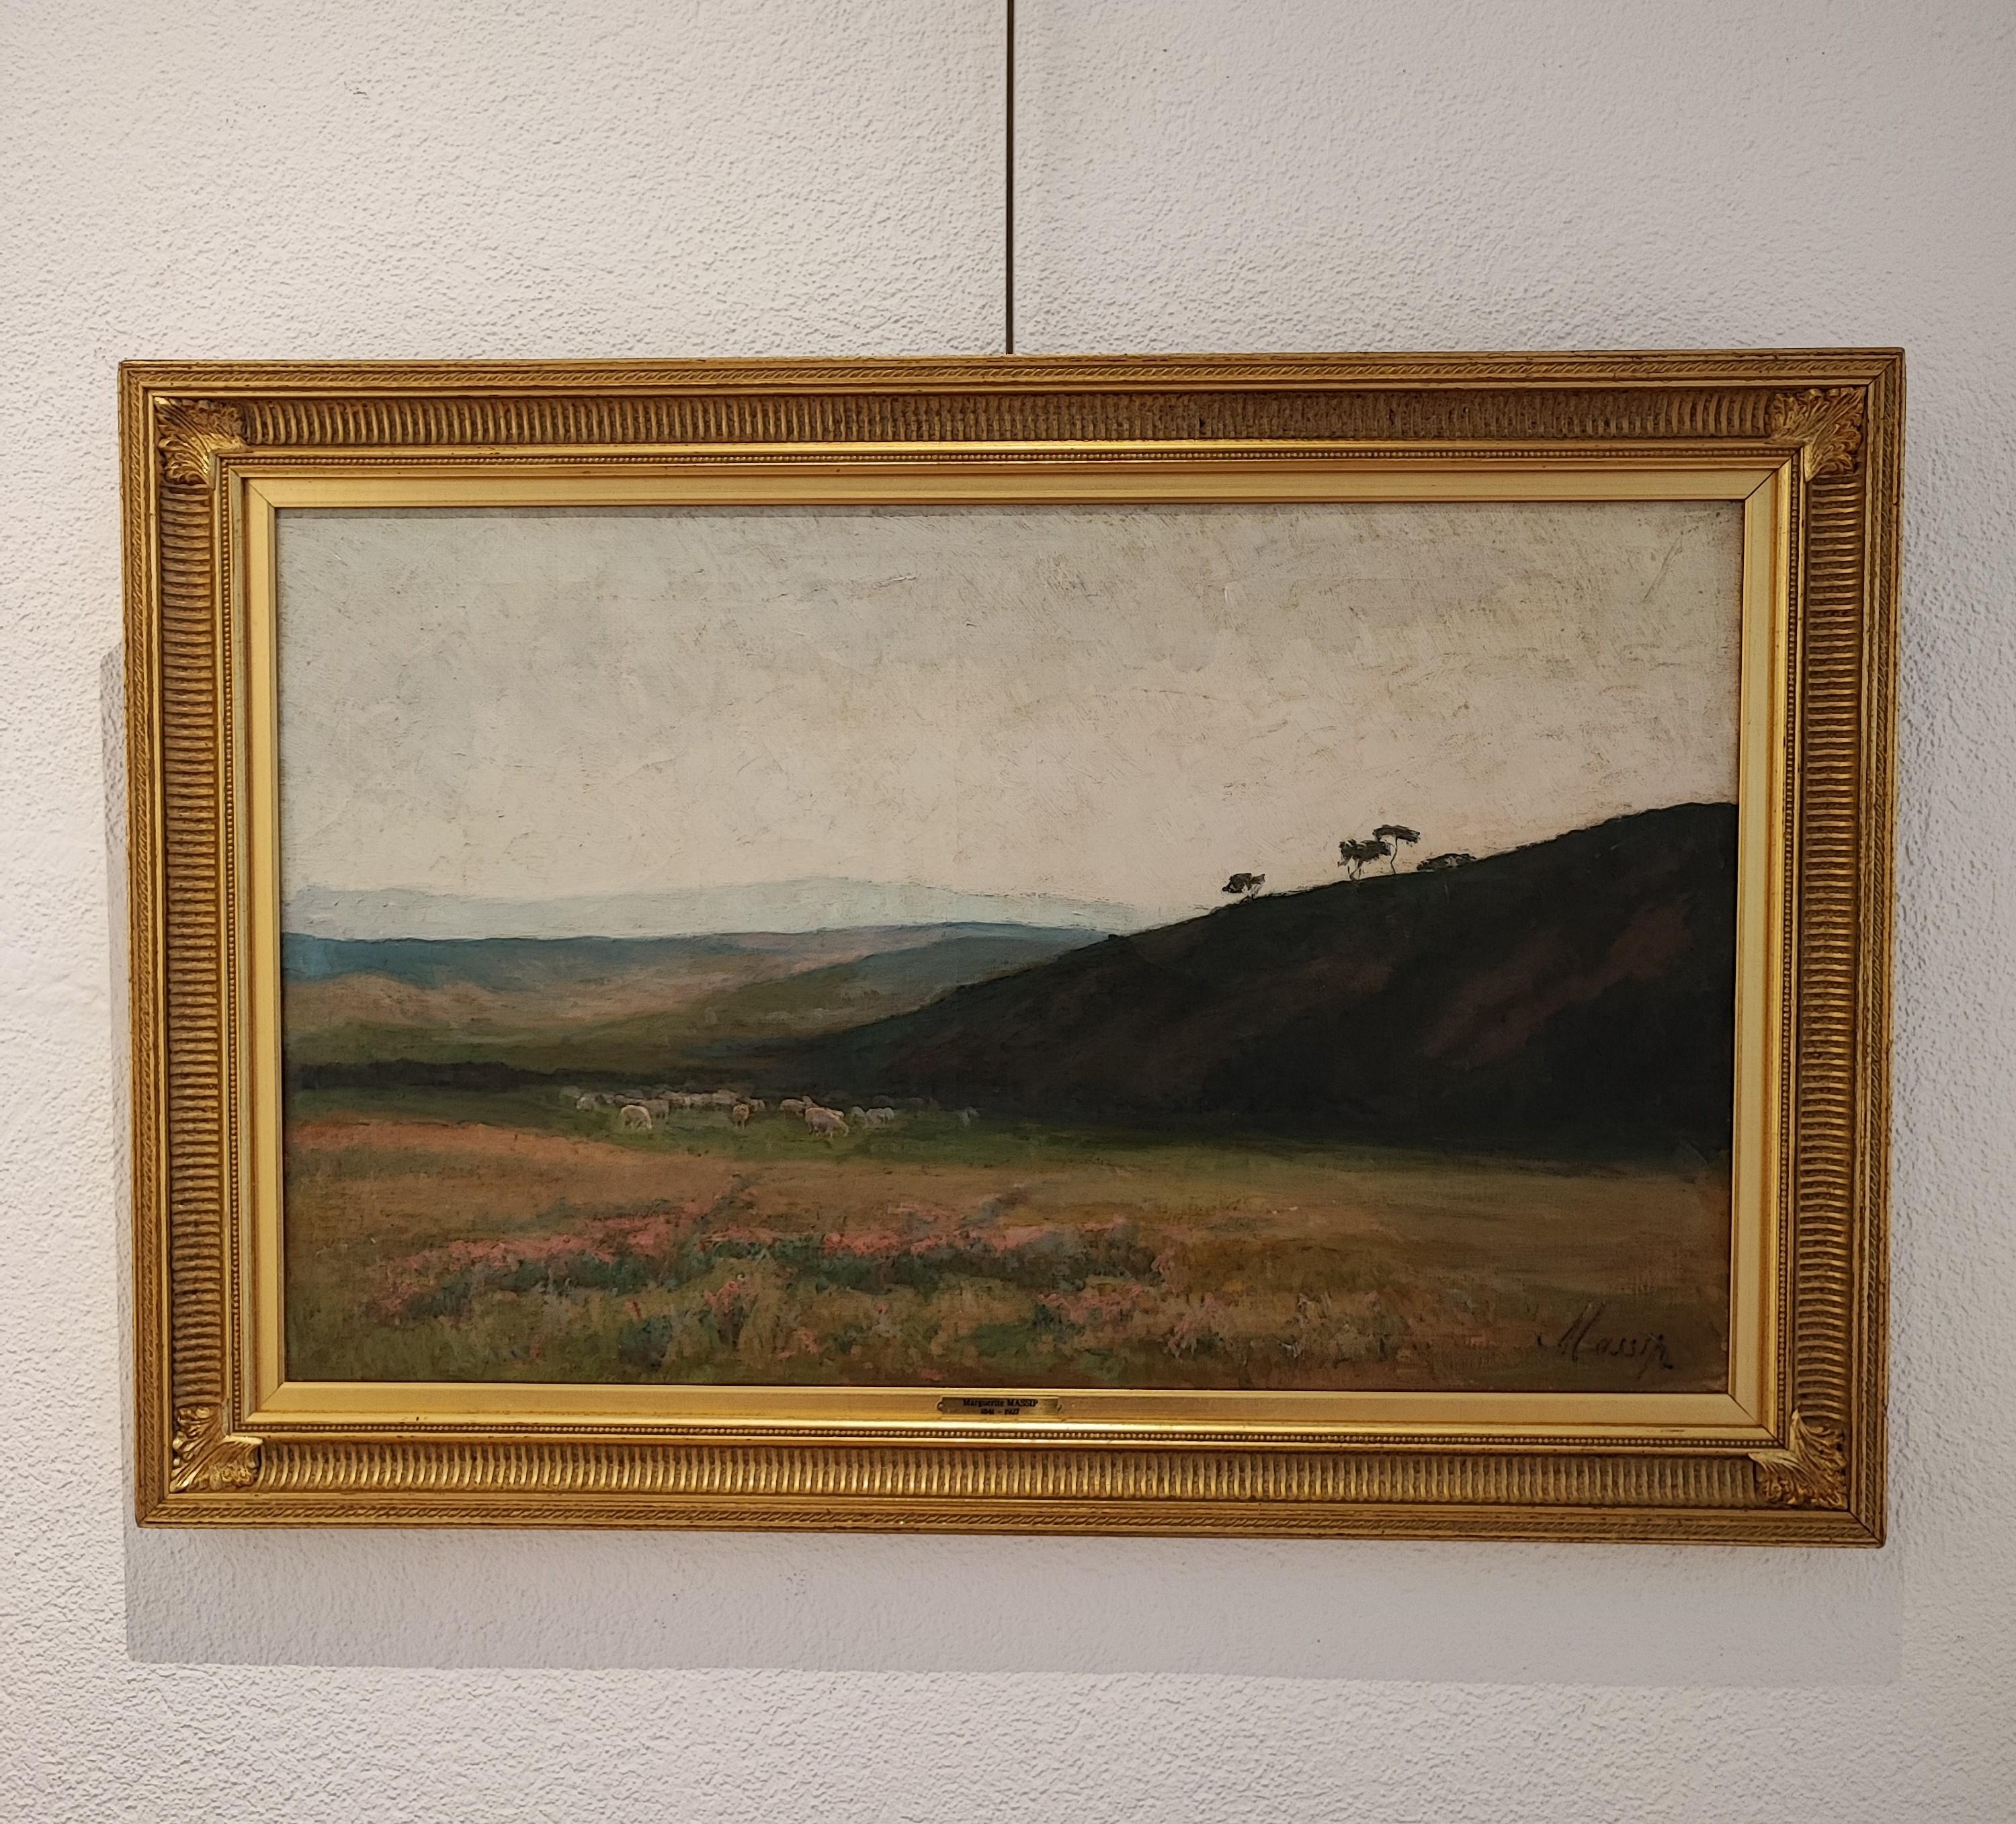 Landscape of hills with pasture - Painting by Marguerite Massip